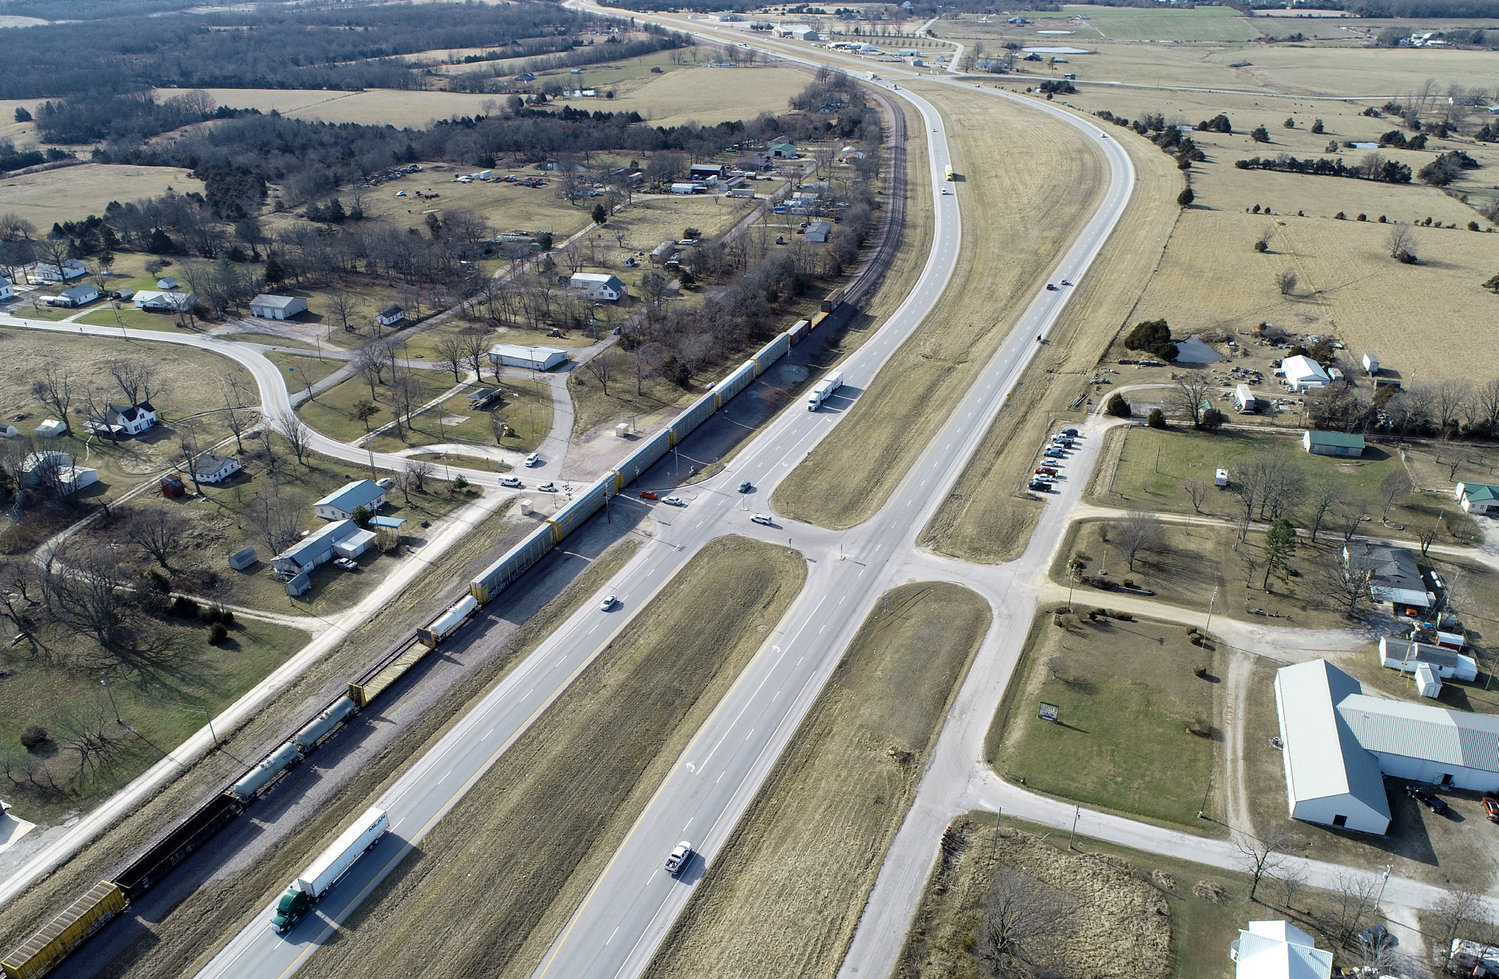 More than $132 million in improvements are planned for the U.S. Highway 60 corridor in Webster County.